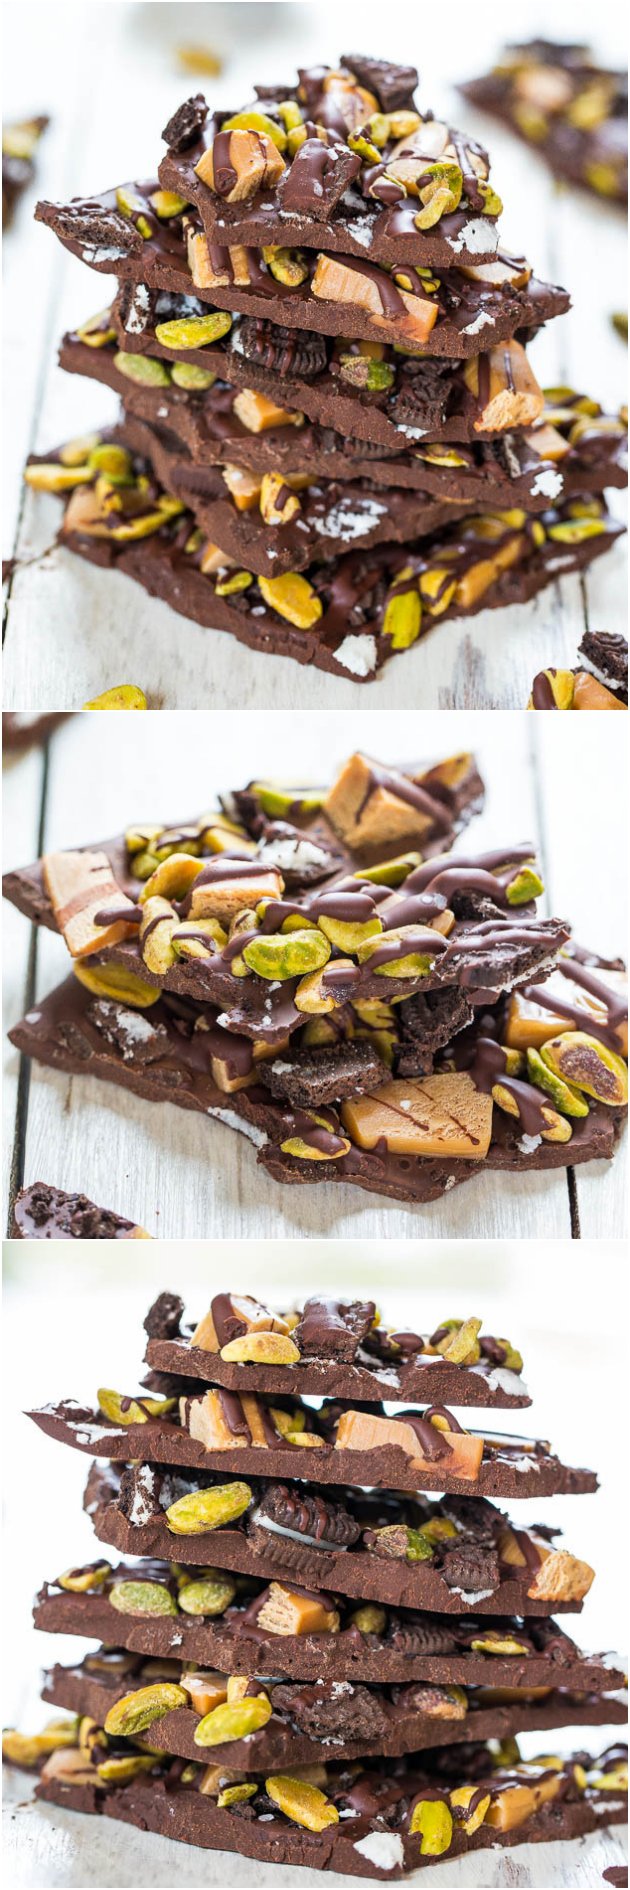 Pistachio, Salted Caramel & Oreo Dark Chocolate Bark - Salty-and-sweet & so good! Dangerously easy & make in 5 minutes!